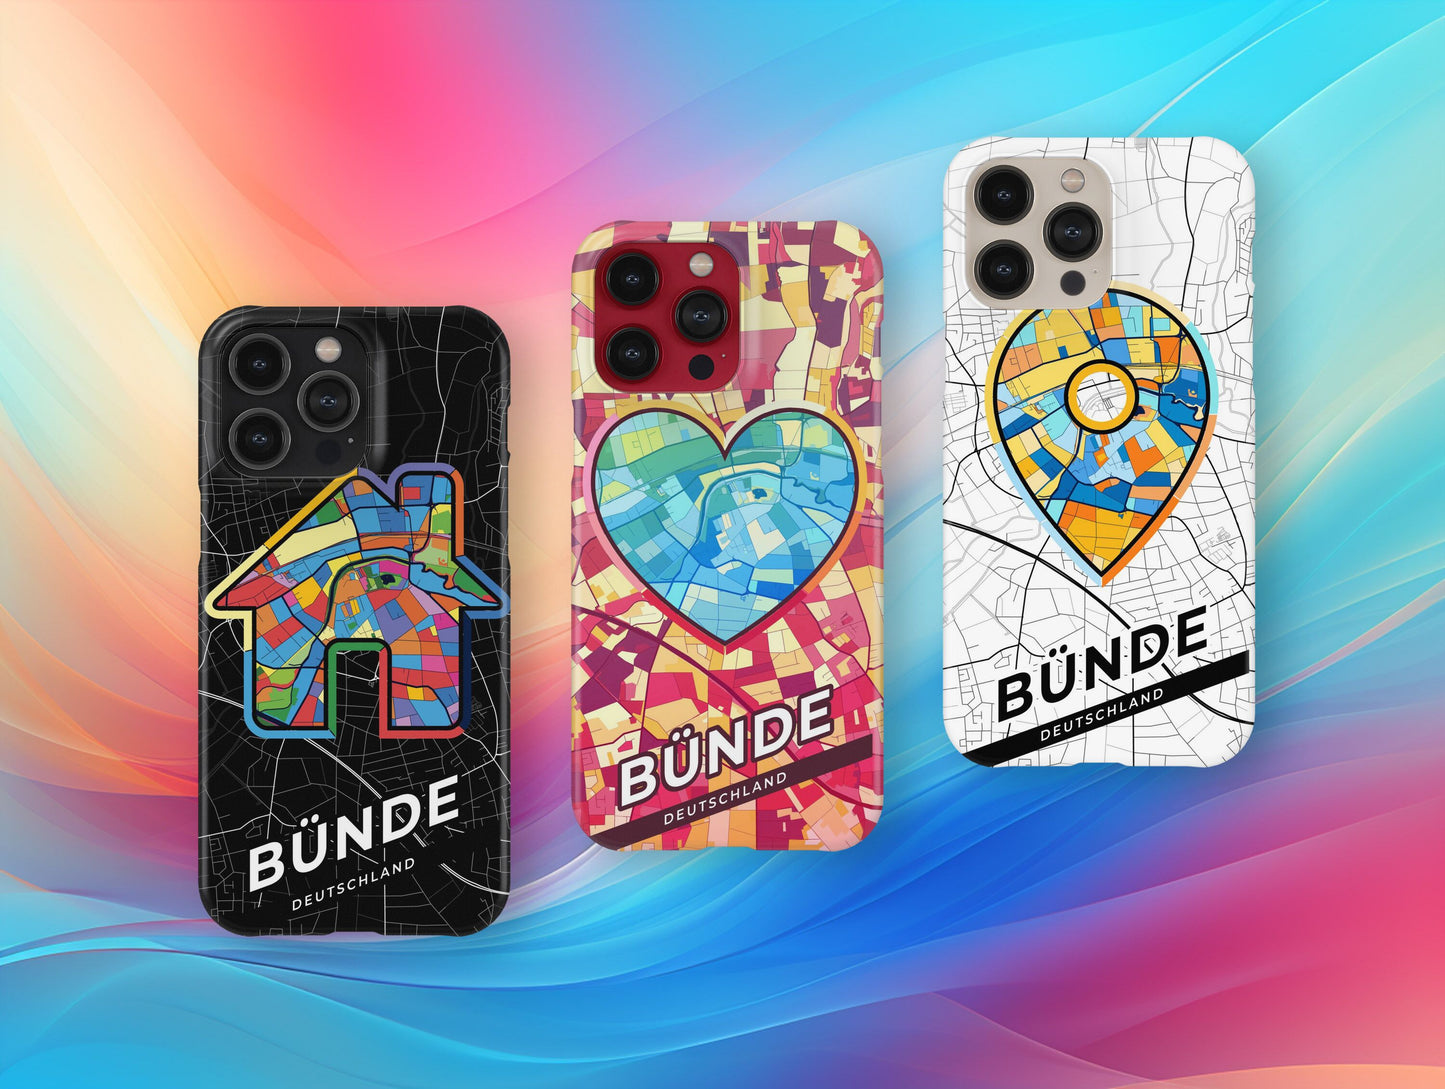 Bünde Deutschland slim phone case with colorful icon. Birthday, wedding or housewarming gift. Couple match cases.